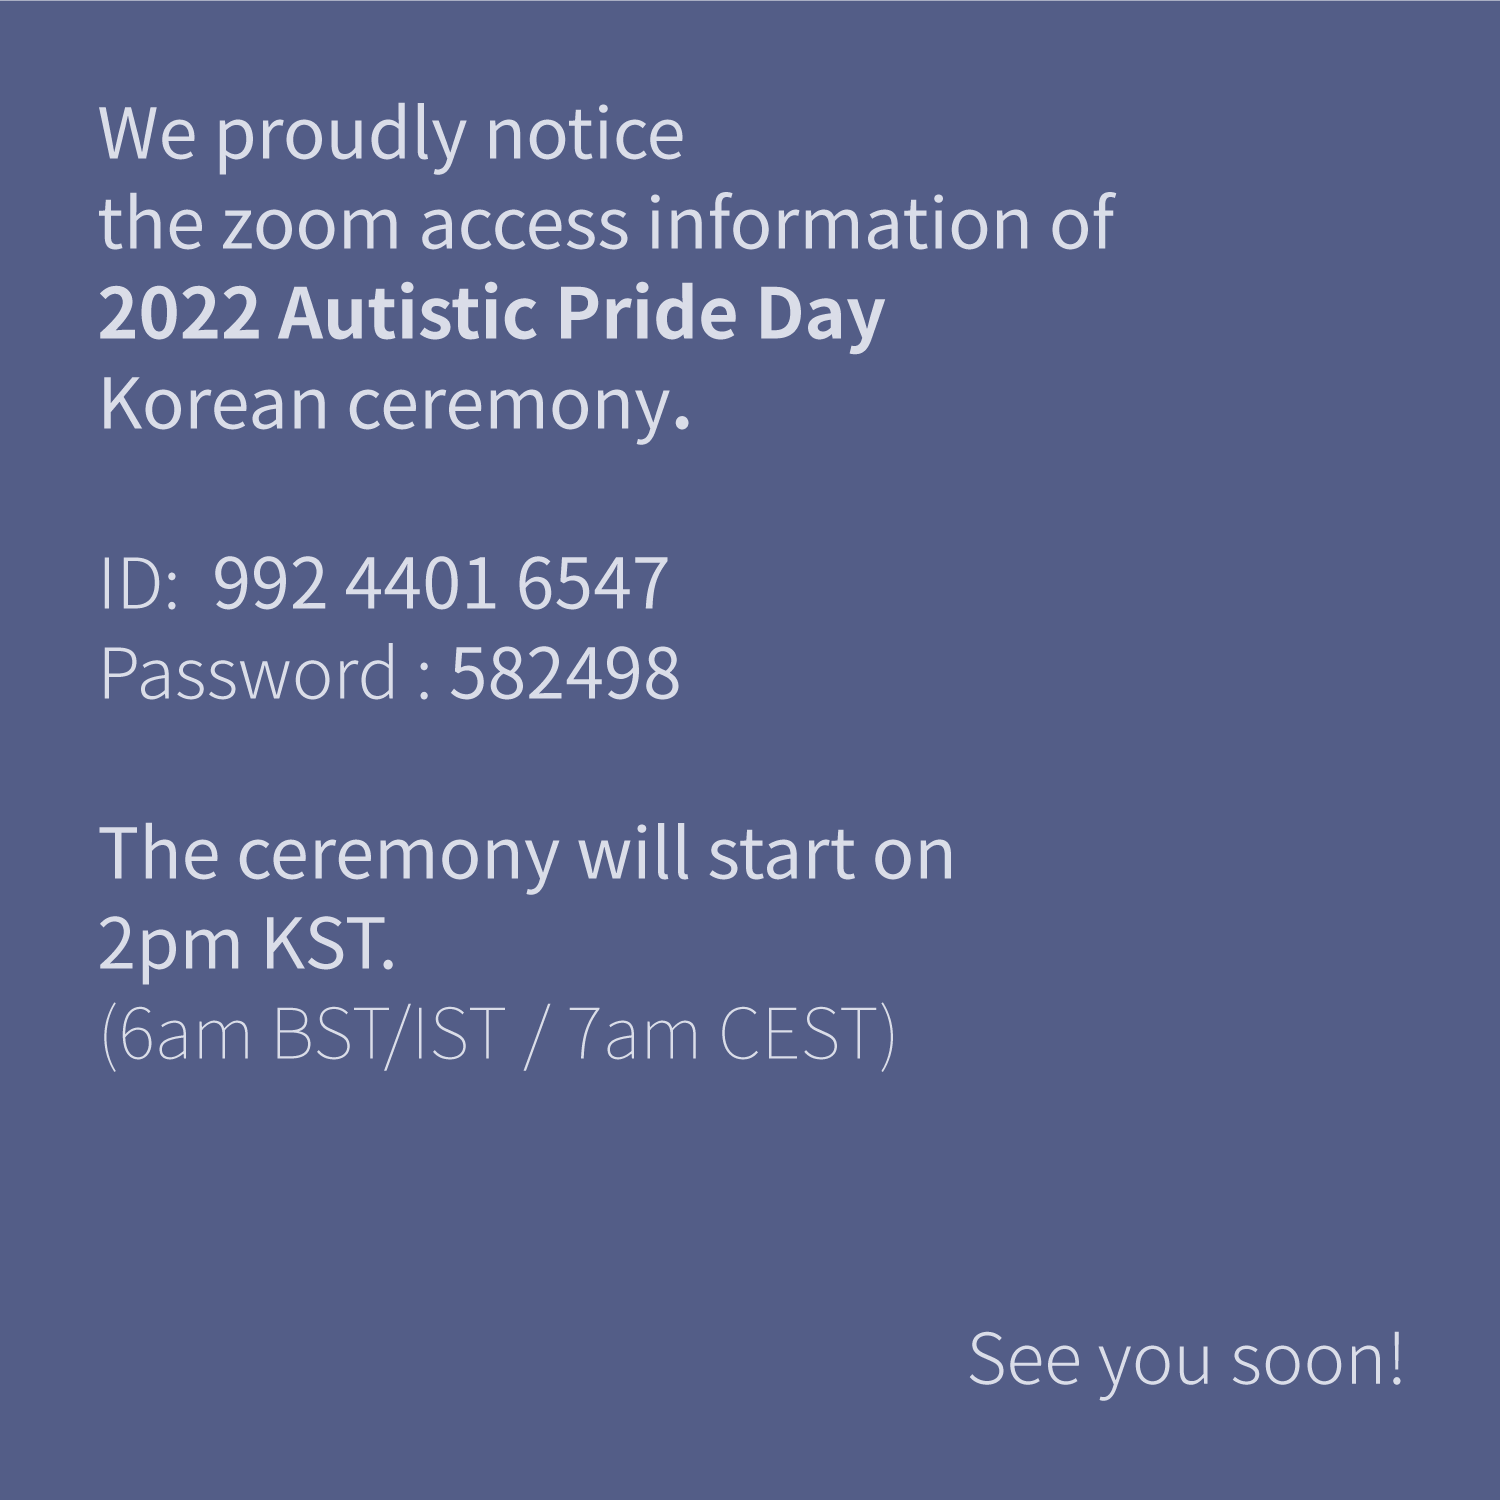 We proudly notice
the zoom access information of
2022 Autistic Pride Day
Korean ceremony.

ID; 992 4401 6547
Password: 582498

The ceremony will start on
2pm KST.
(6am BST/IST / 7am CEST)

 See you soon!